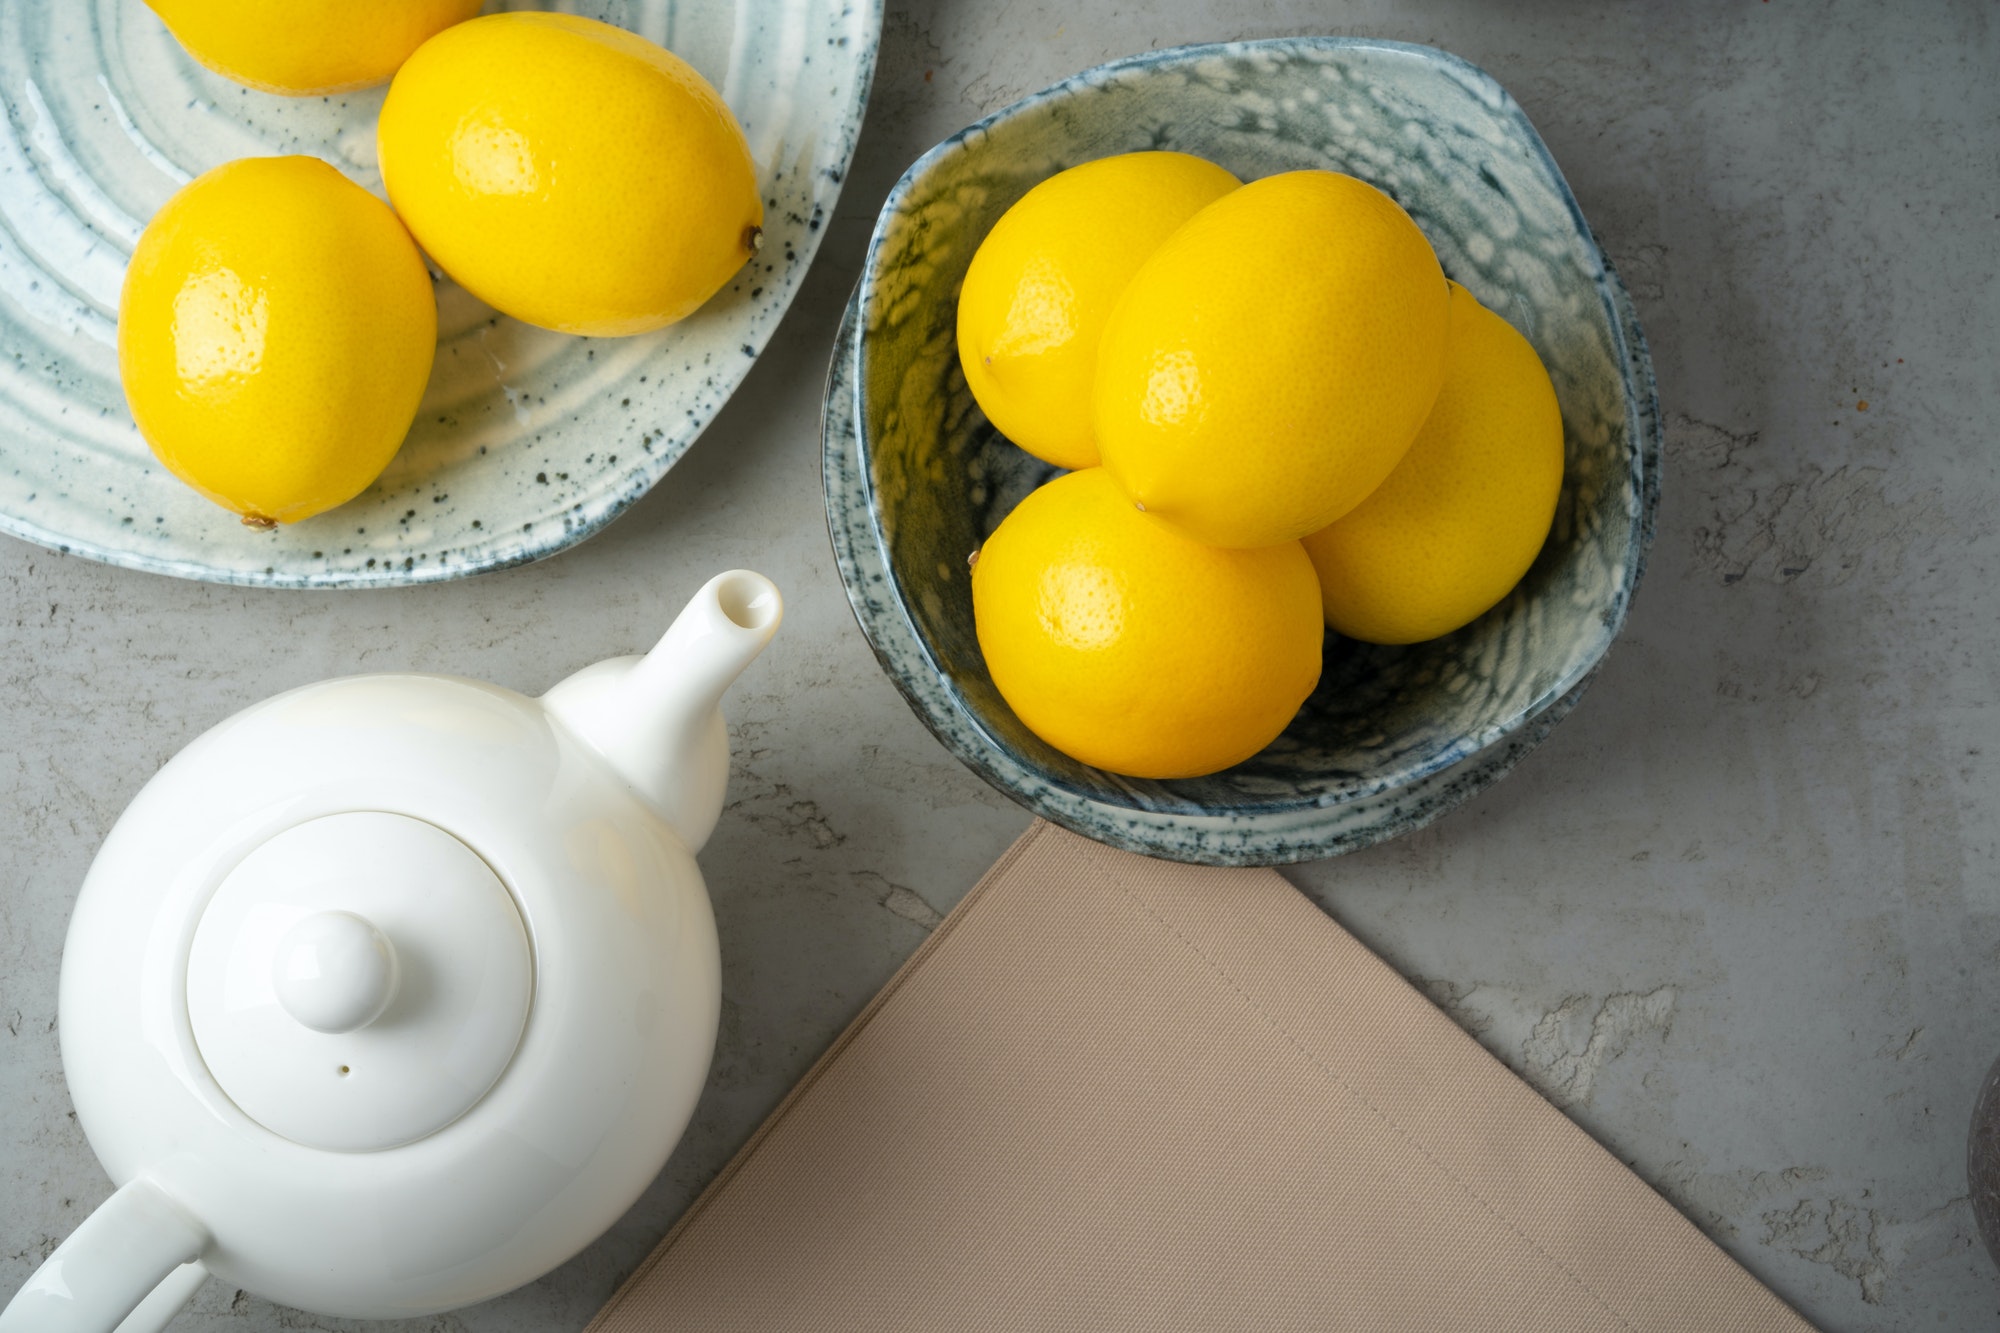 New ceramic dishware with several lemons for decoration